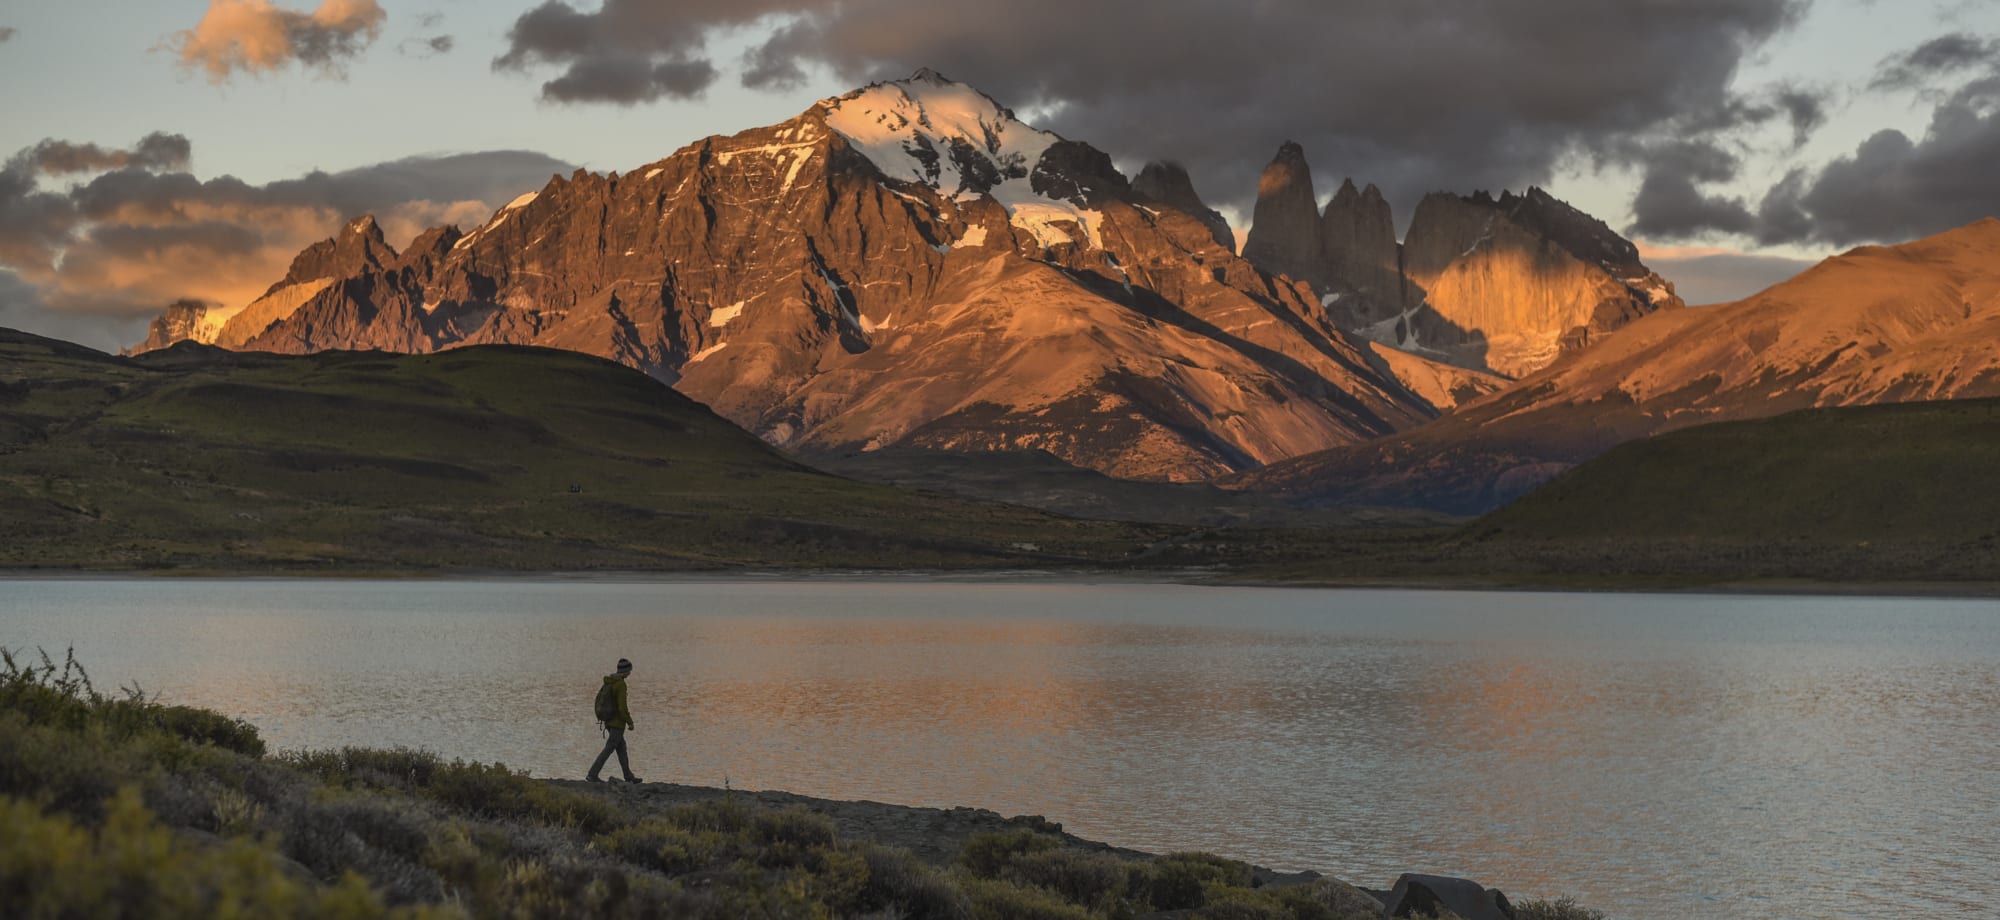 A man is walking in front of a lake with mountains in the background glowing orange from the sunset. 